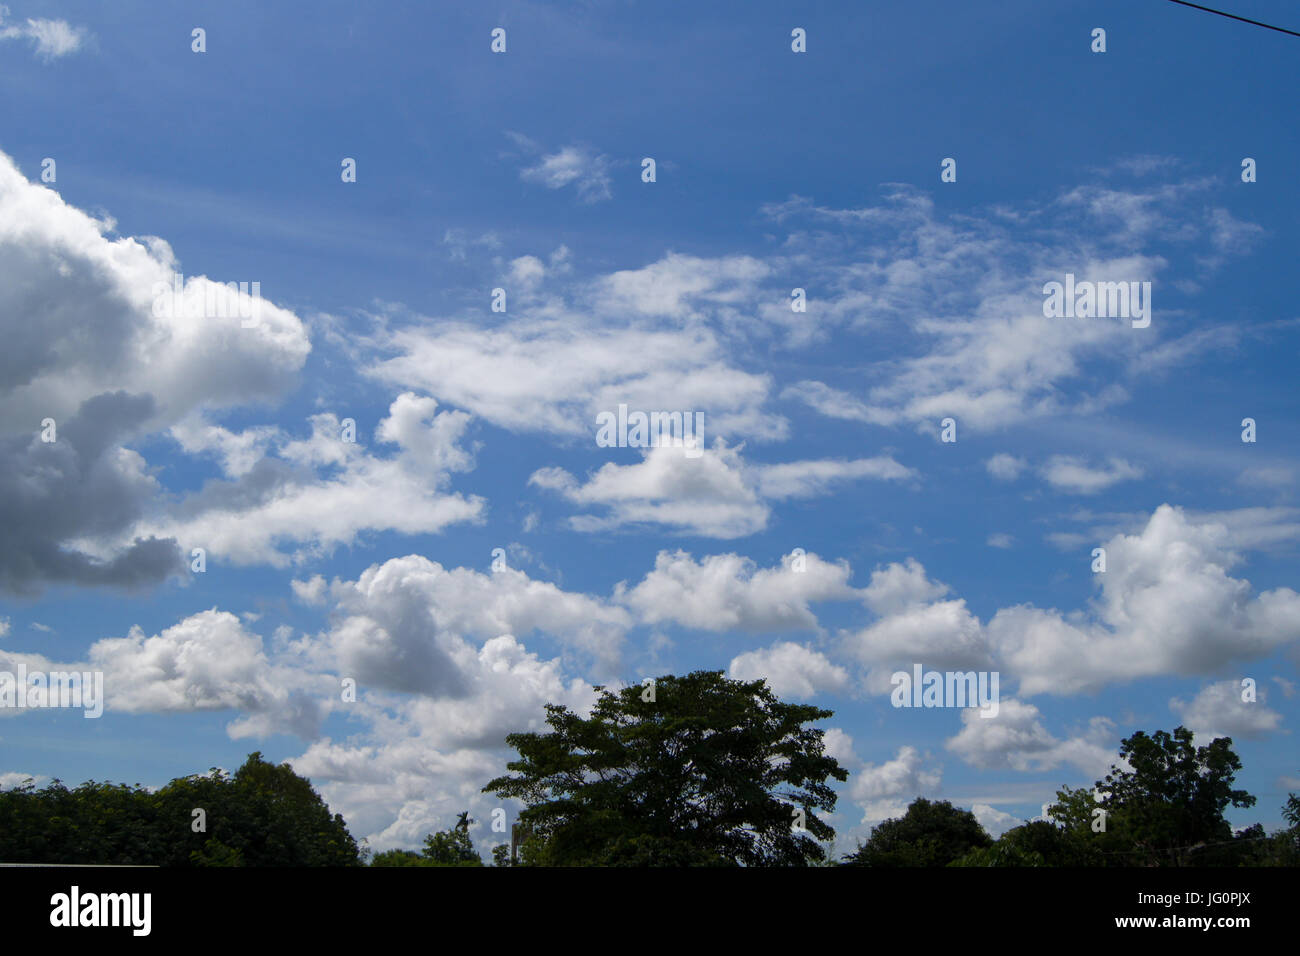 Blue sky with white cloud Stock Photo